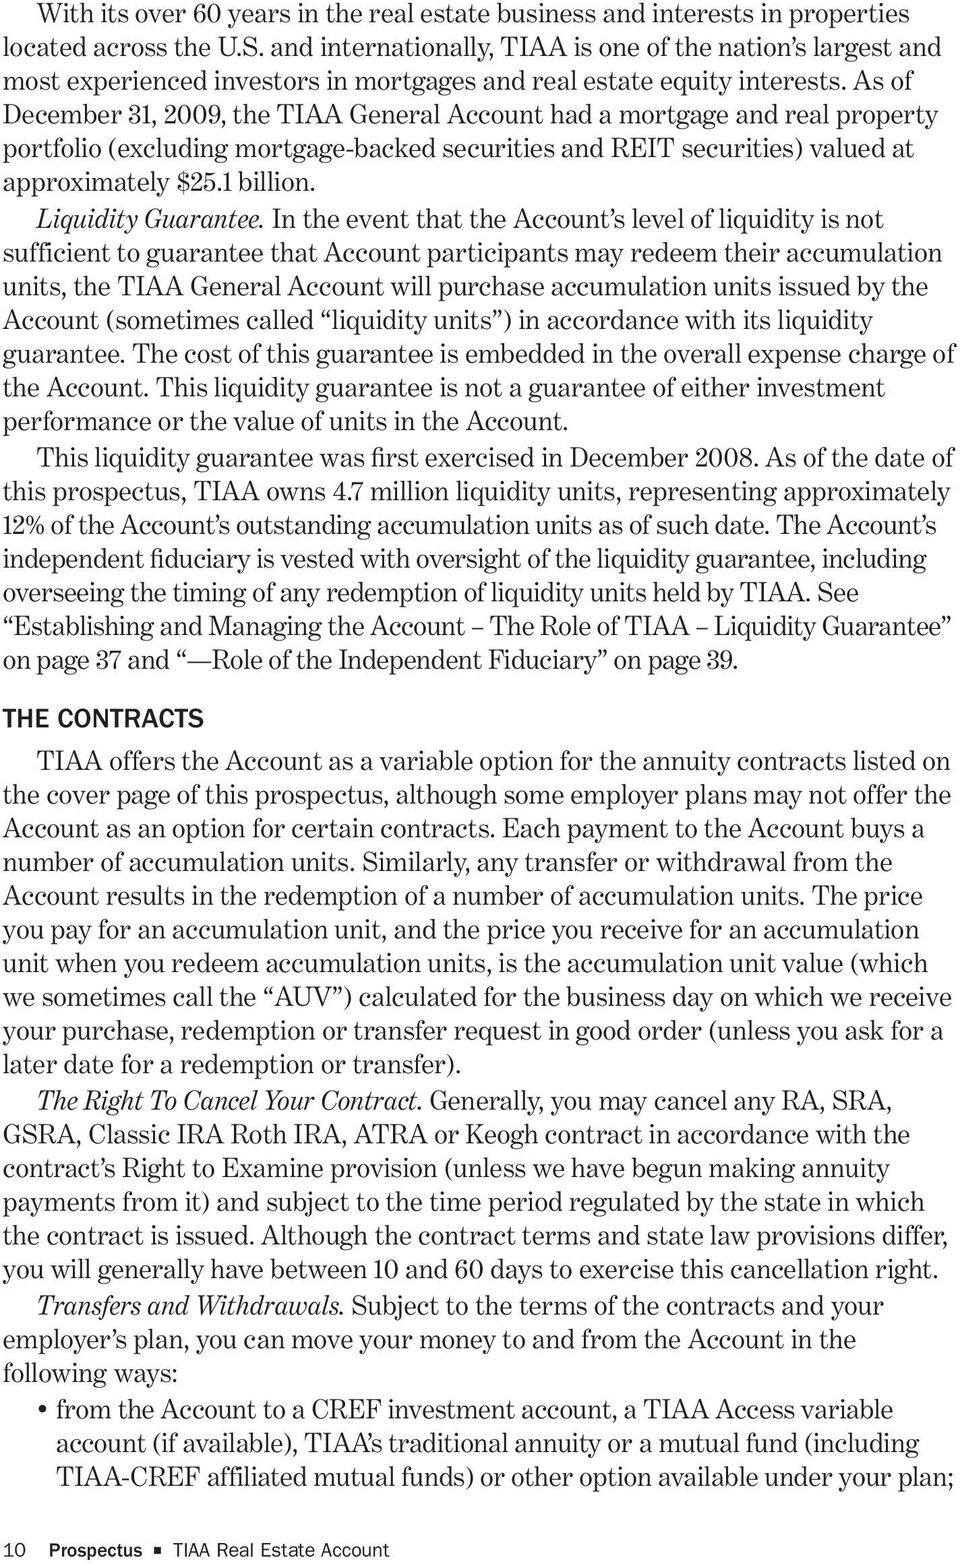 As of December 31, 2009, the TIAA General Account had a mortgage and real property portfolio (excluding mortgage-backed securities and REIT securities) valued at approximately $25.1 billion.